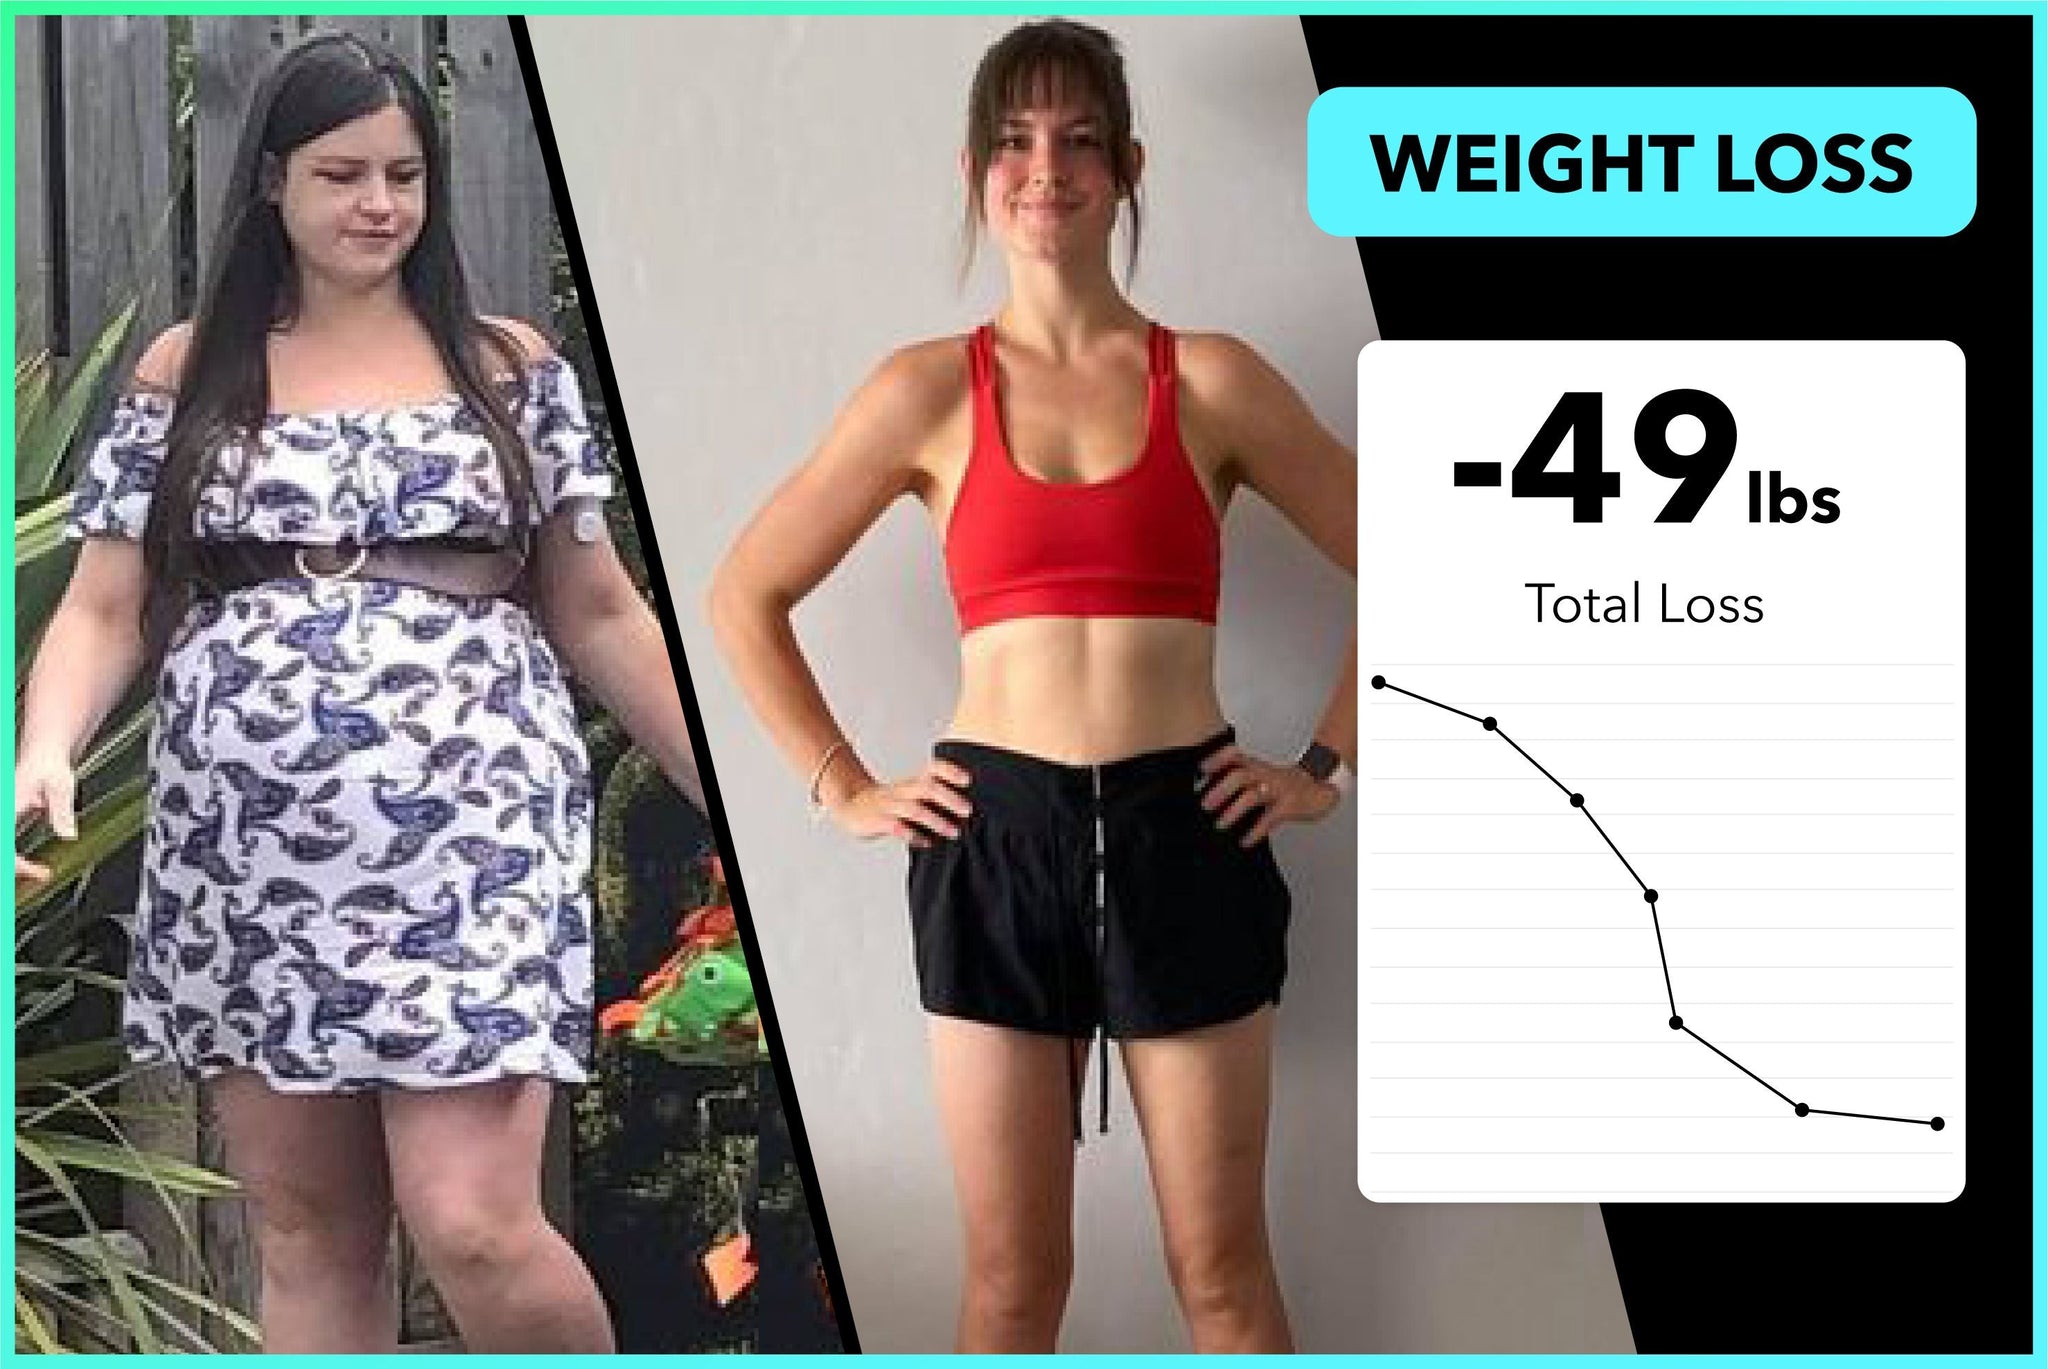 Find out how Melanie lost 49lbs with Team RH